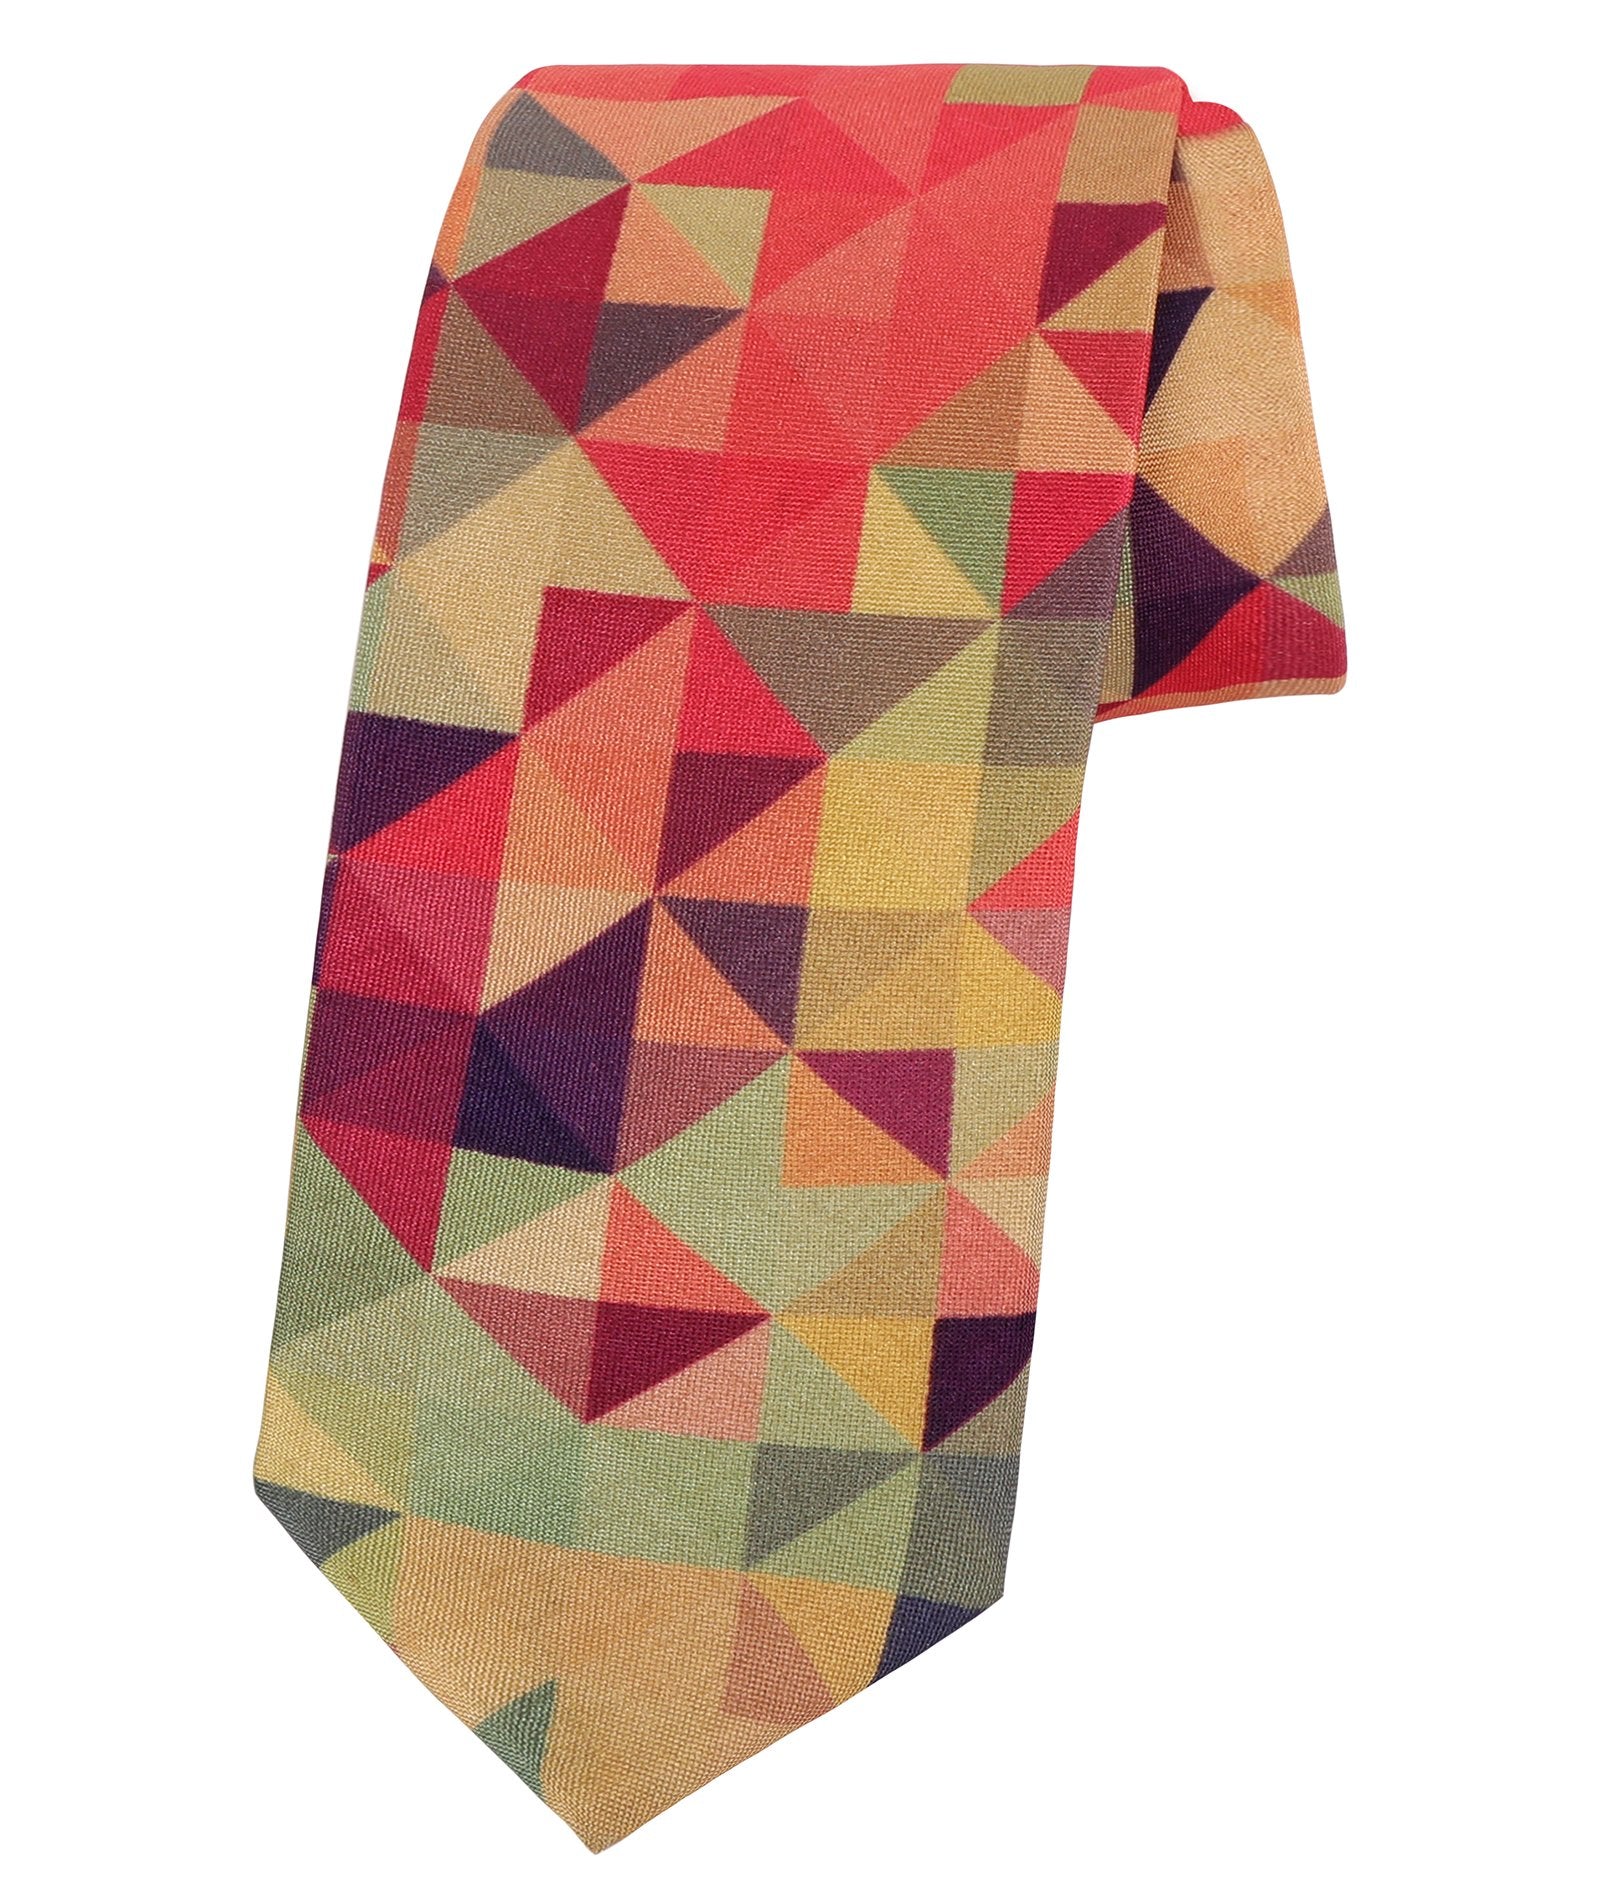 Psychedelic Shades of Pink Tie